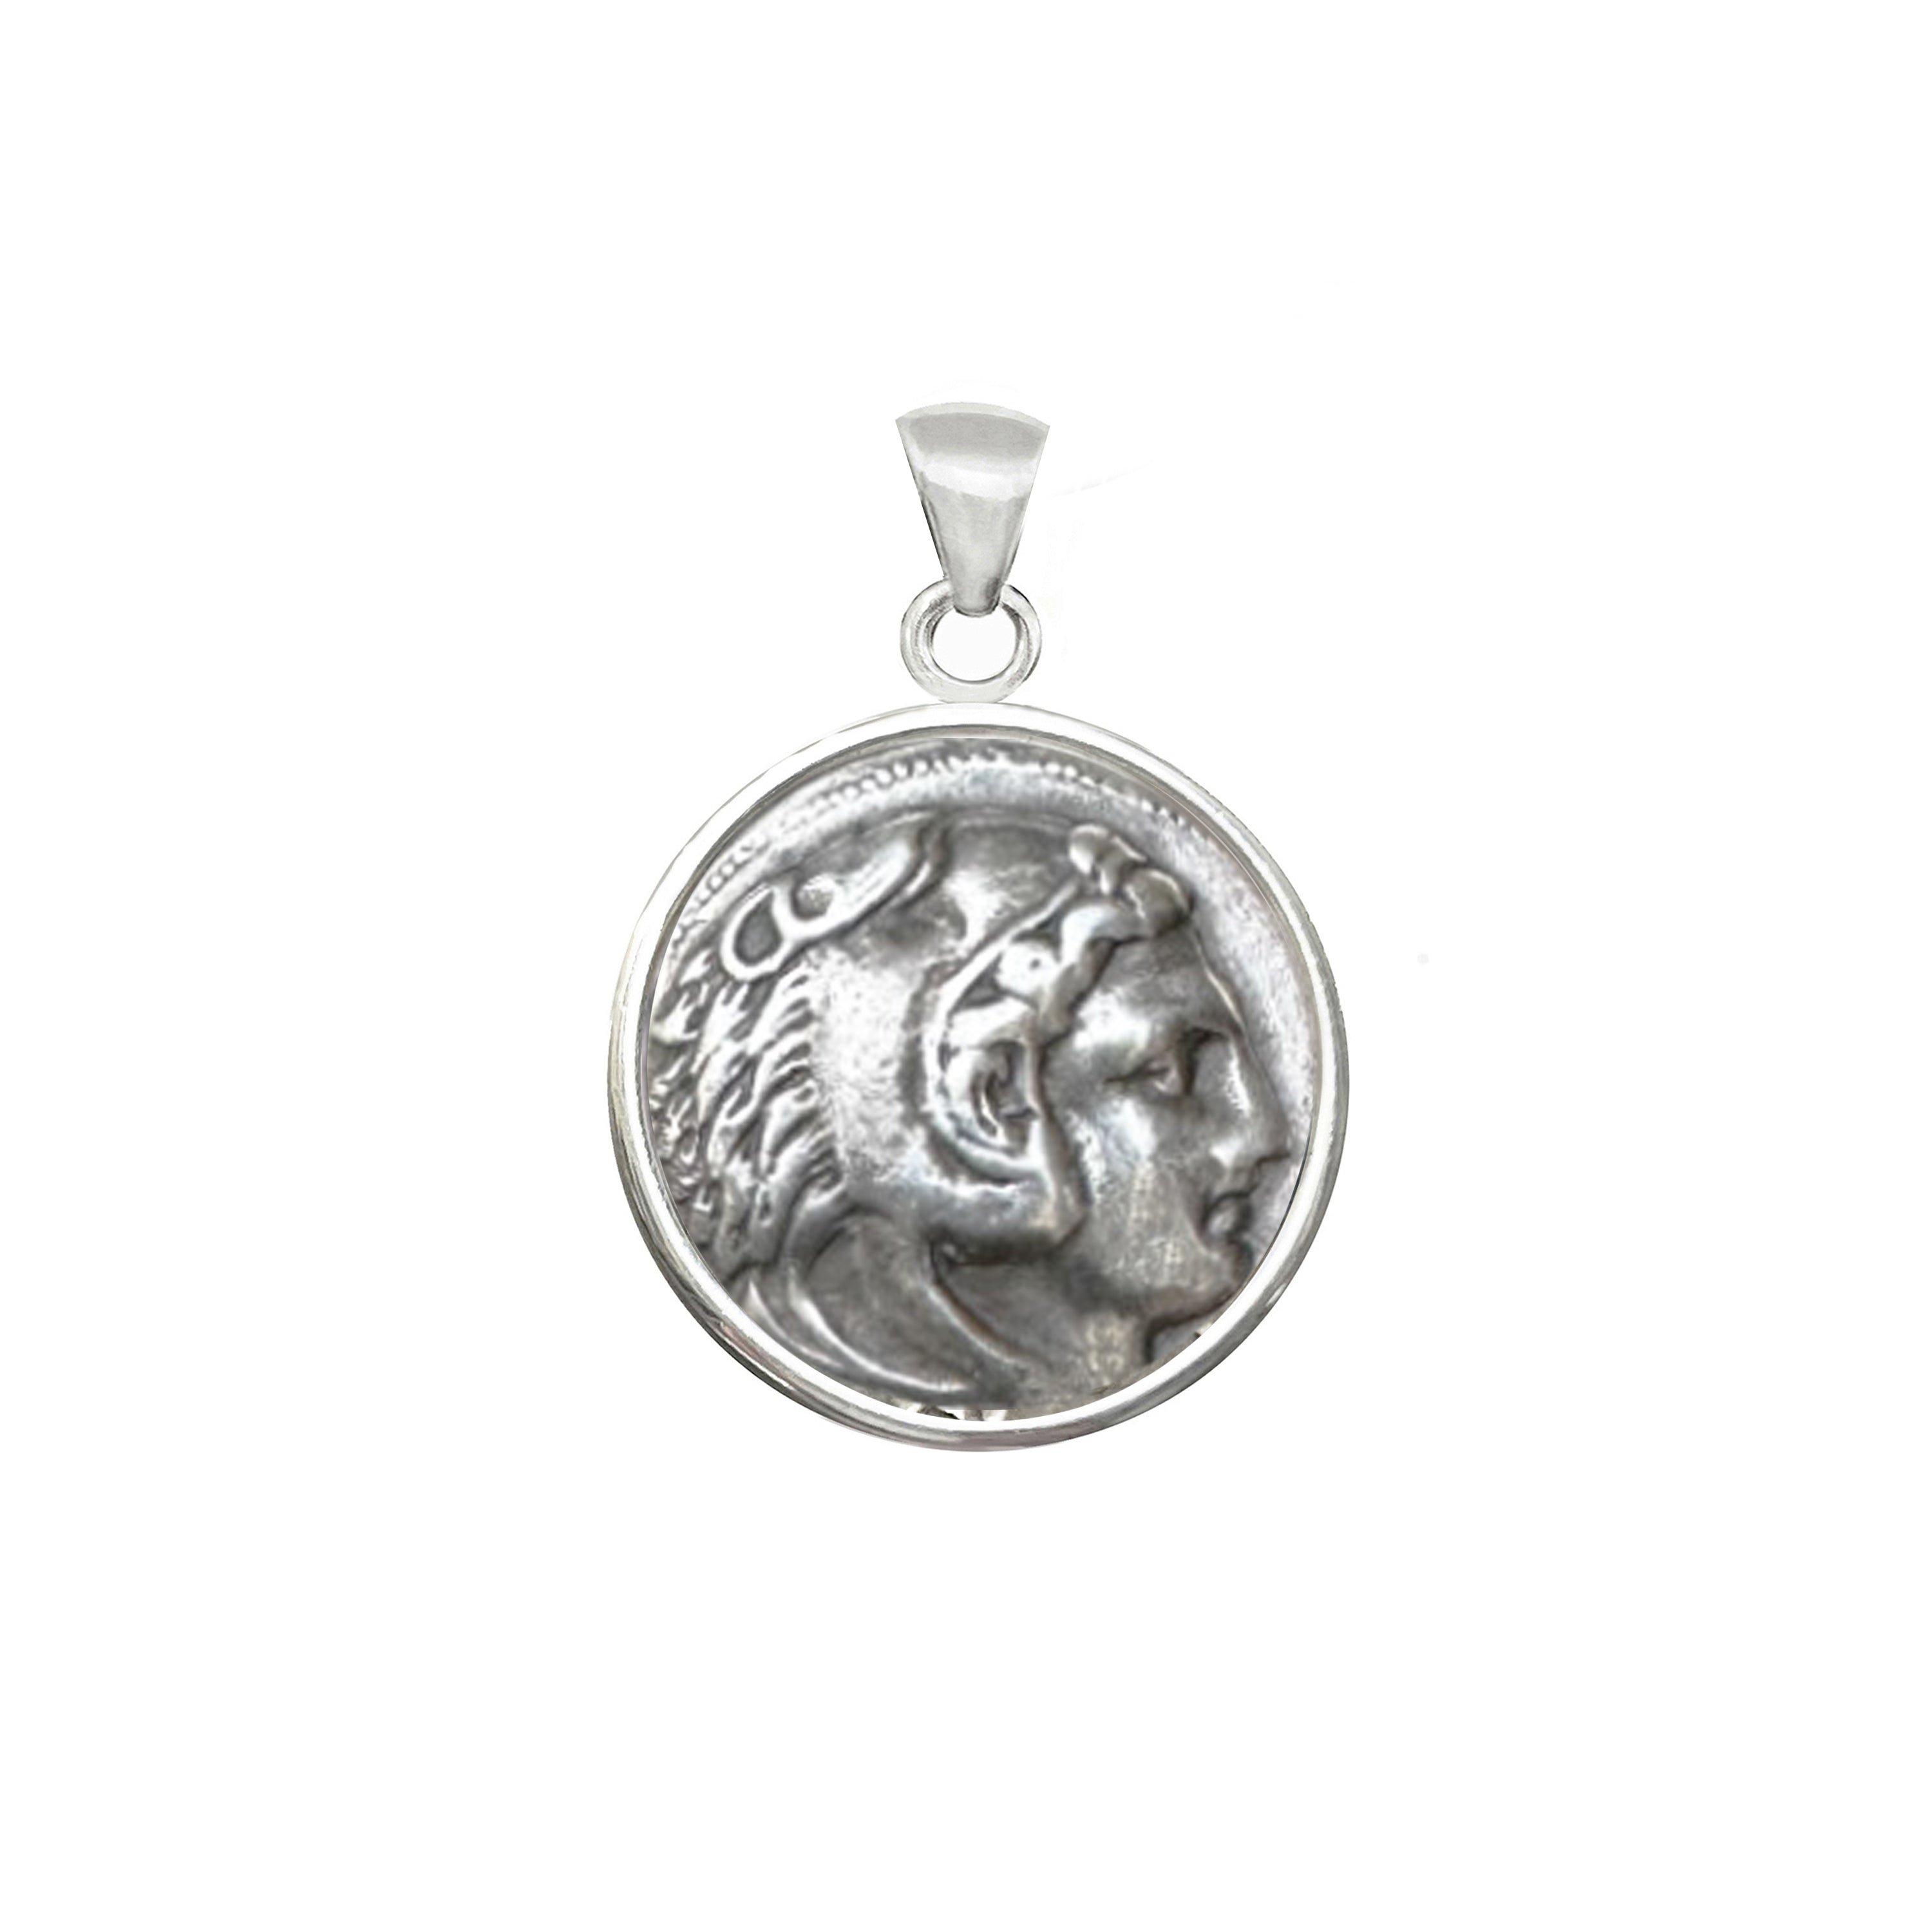 Genuine Ancient Greek Coin 336-323 BC Silver Pendant depicting Heracles with a lion skin (Minted by Alexander the Great)